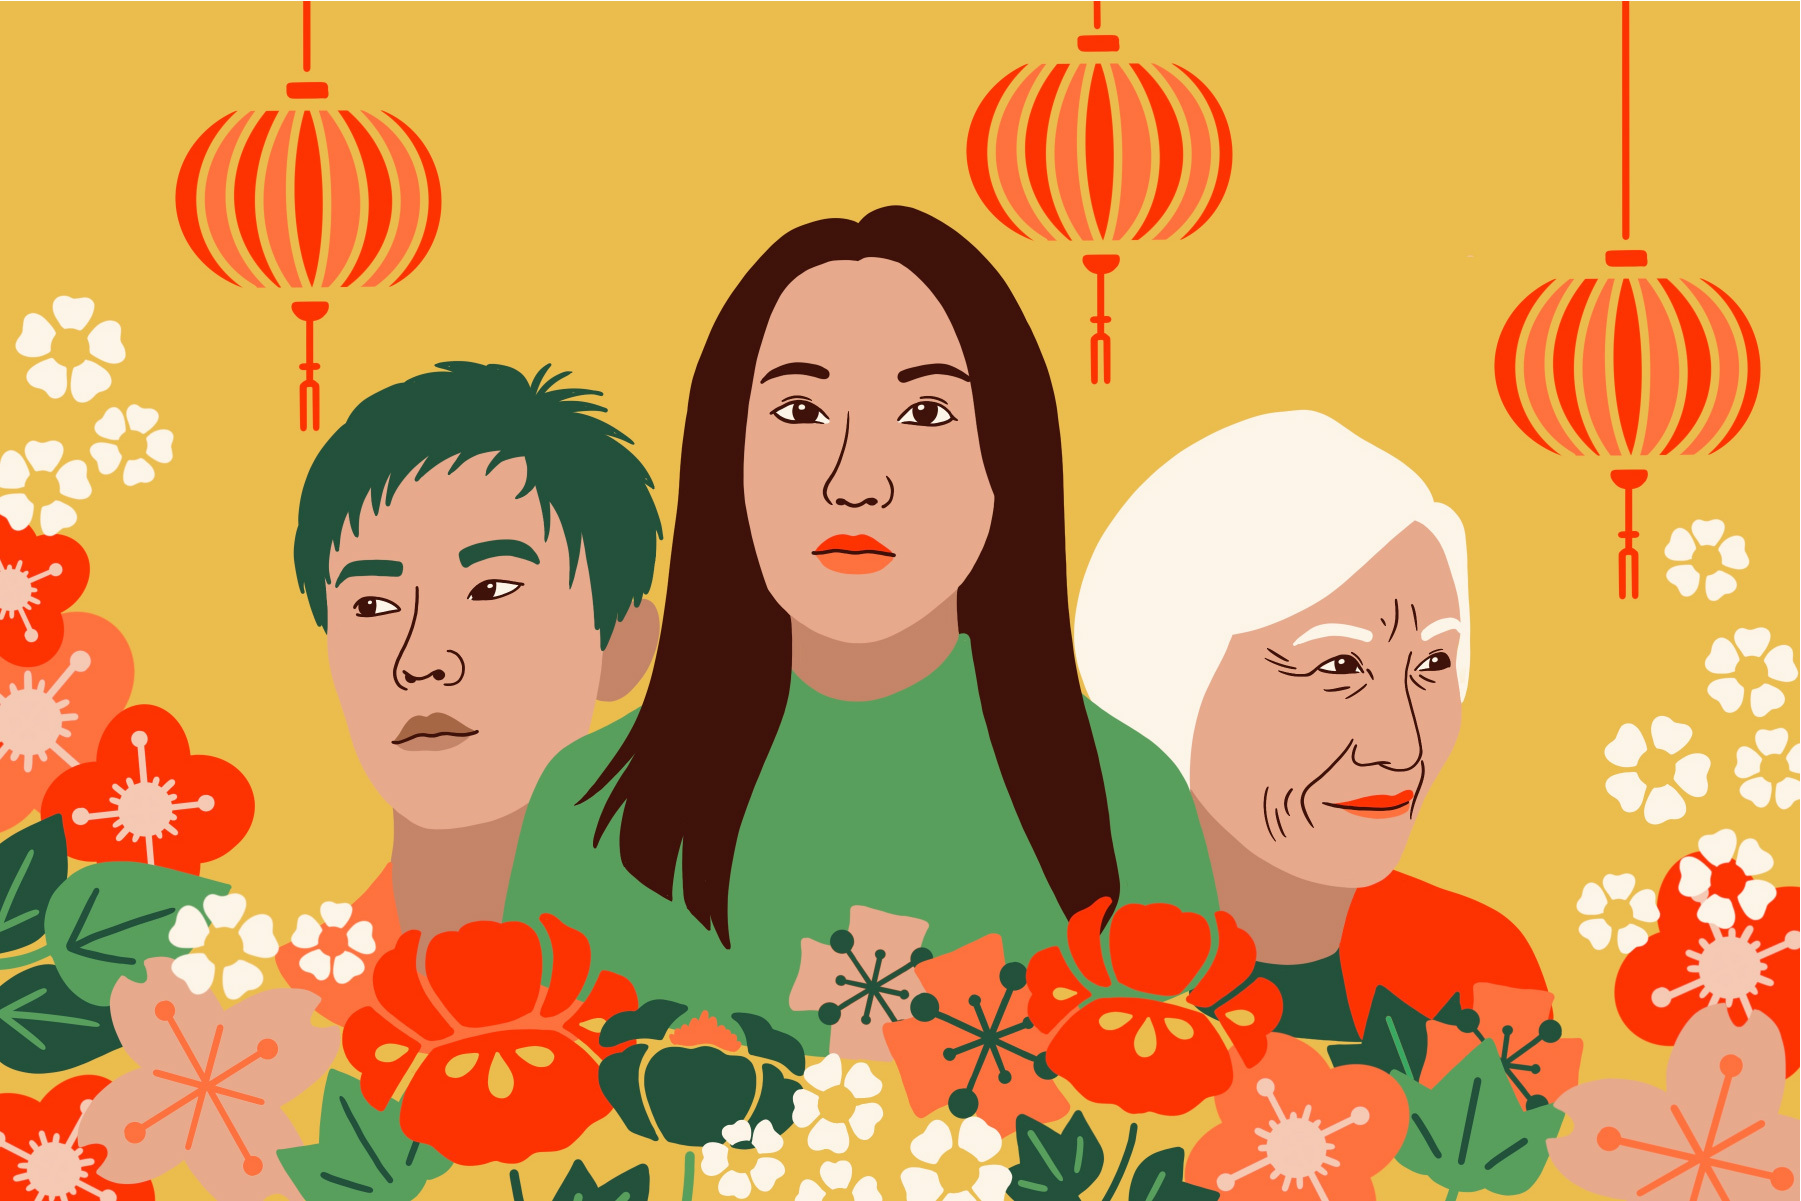 Illustration by Lexey Gonzalez for an article on hate crimes against Asians